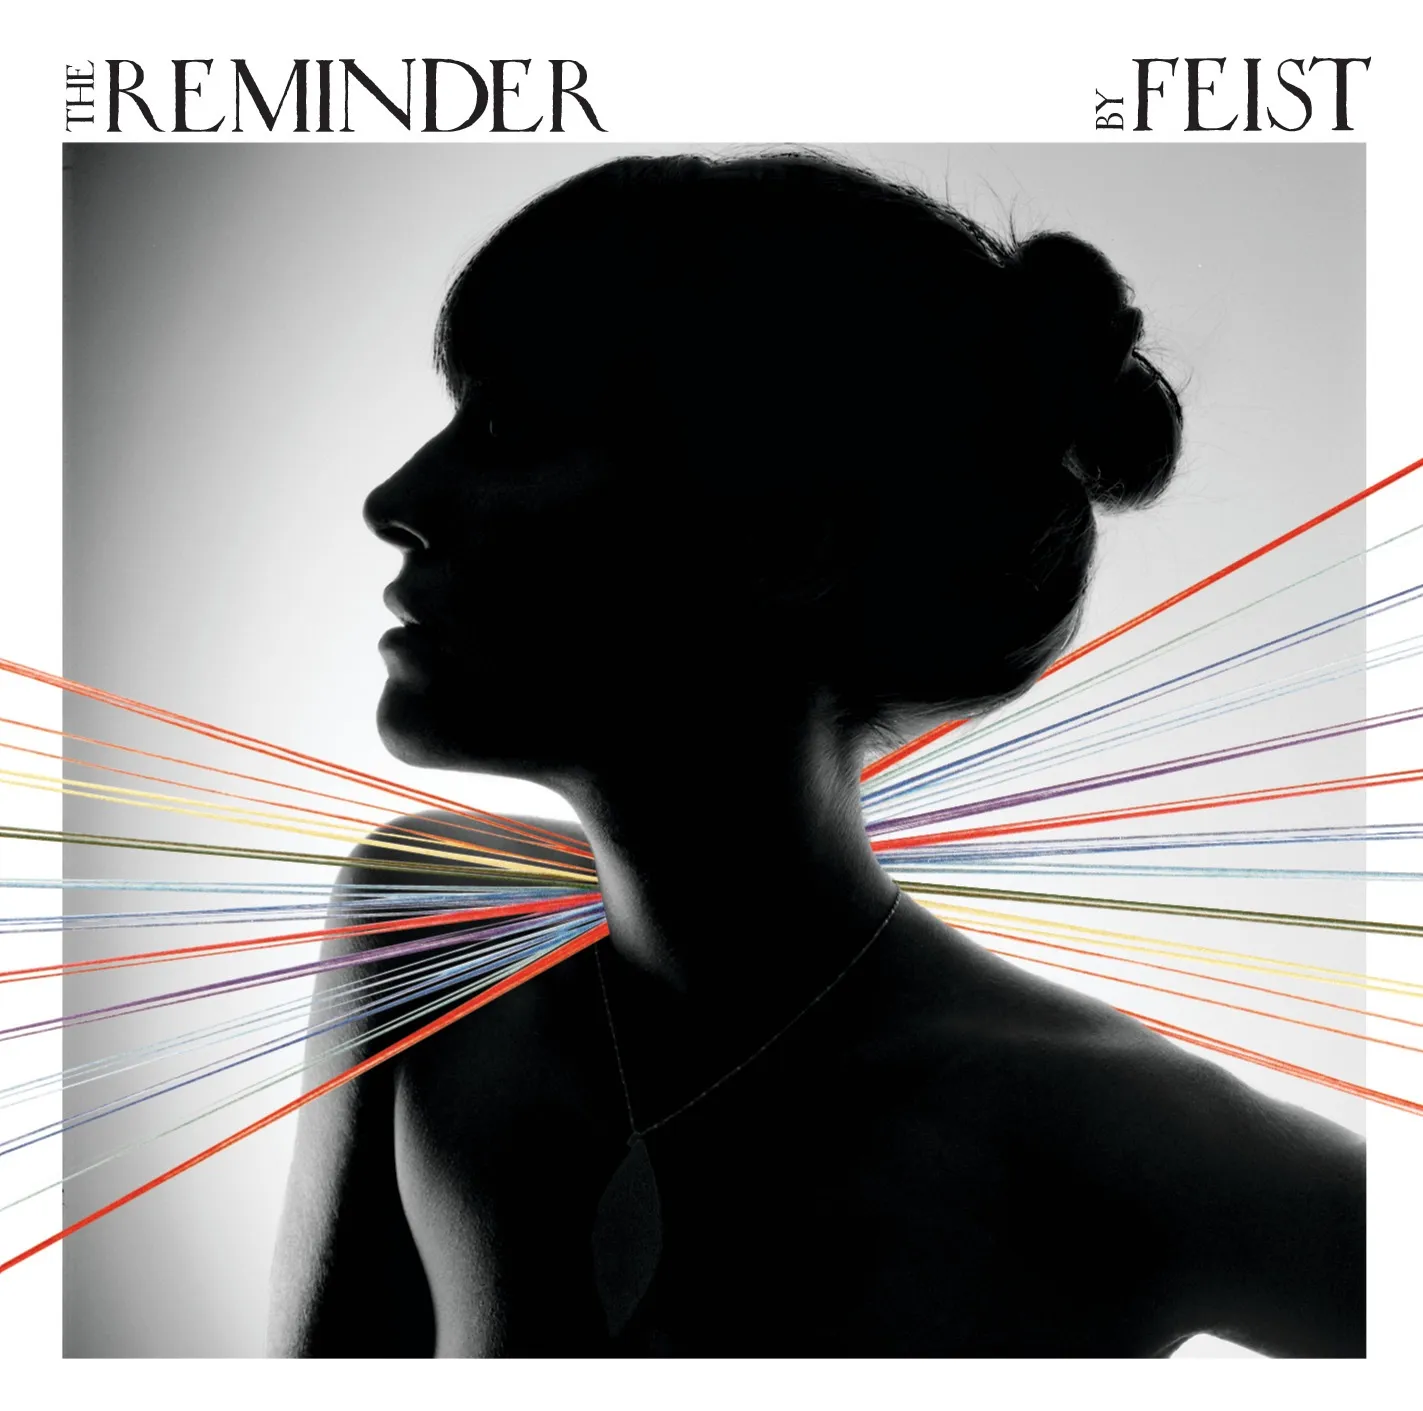 <strong>Feist - The Reminder</strong> (Vinyl LP - black)